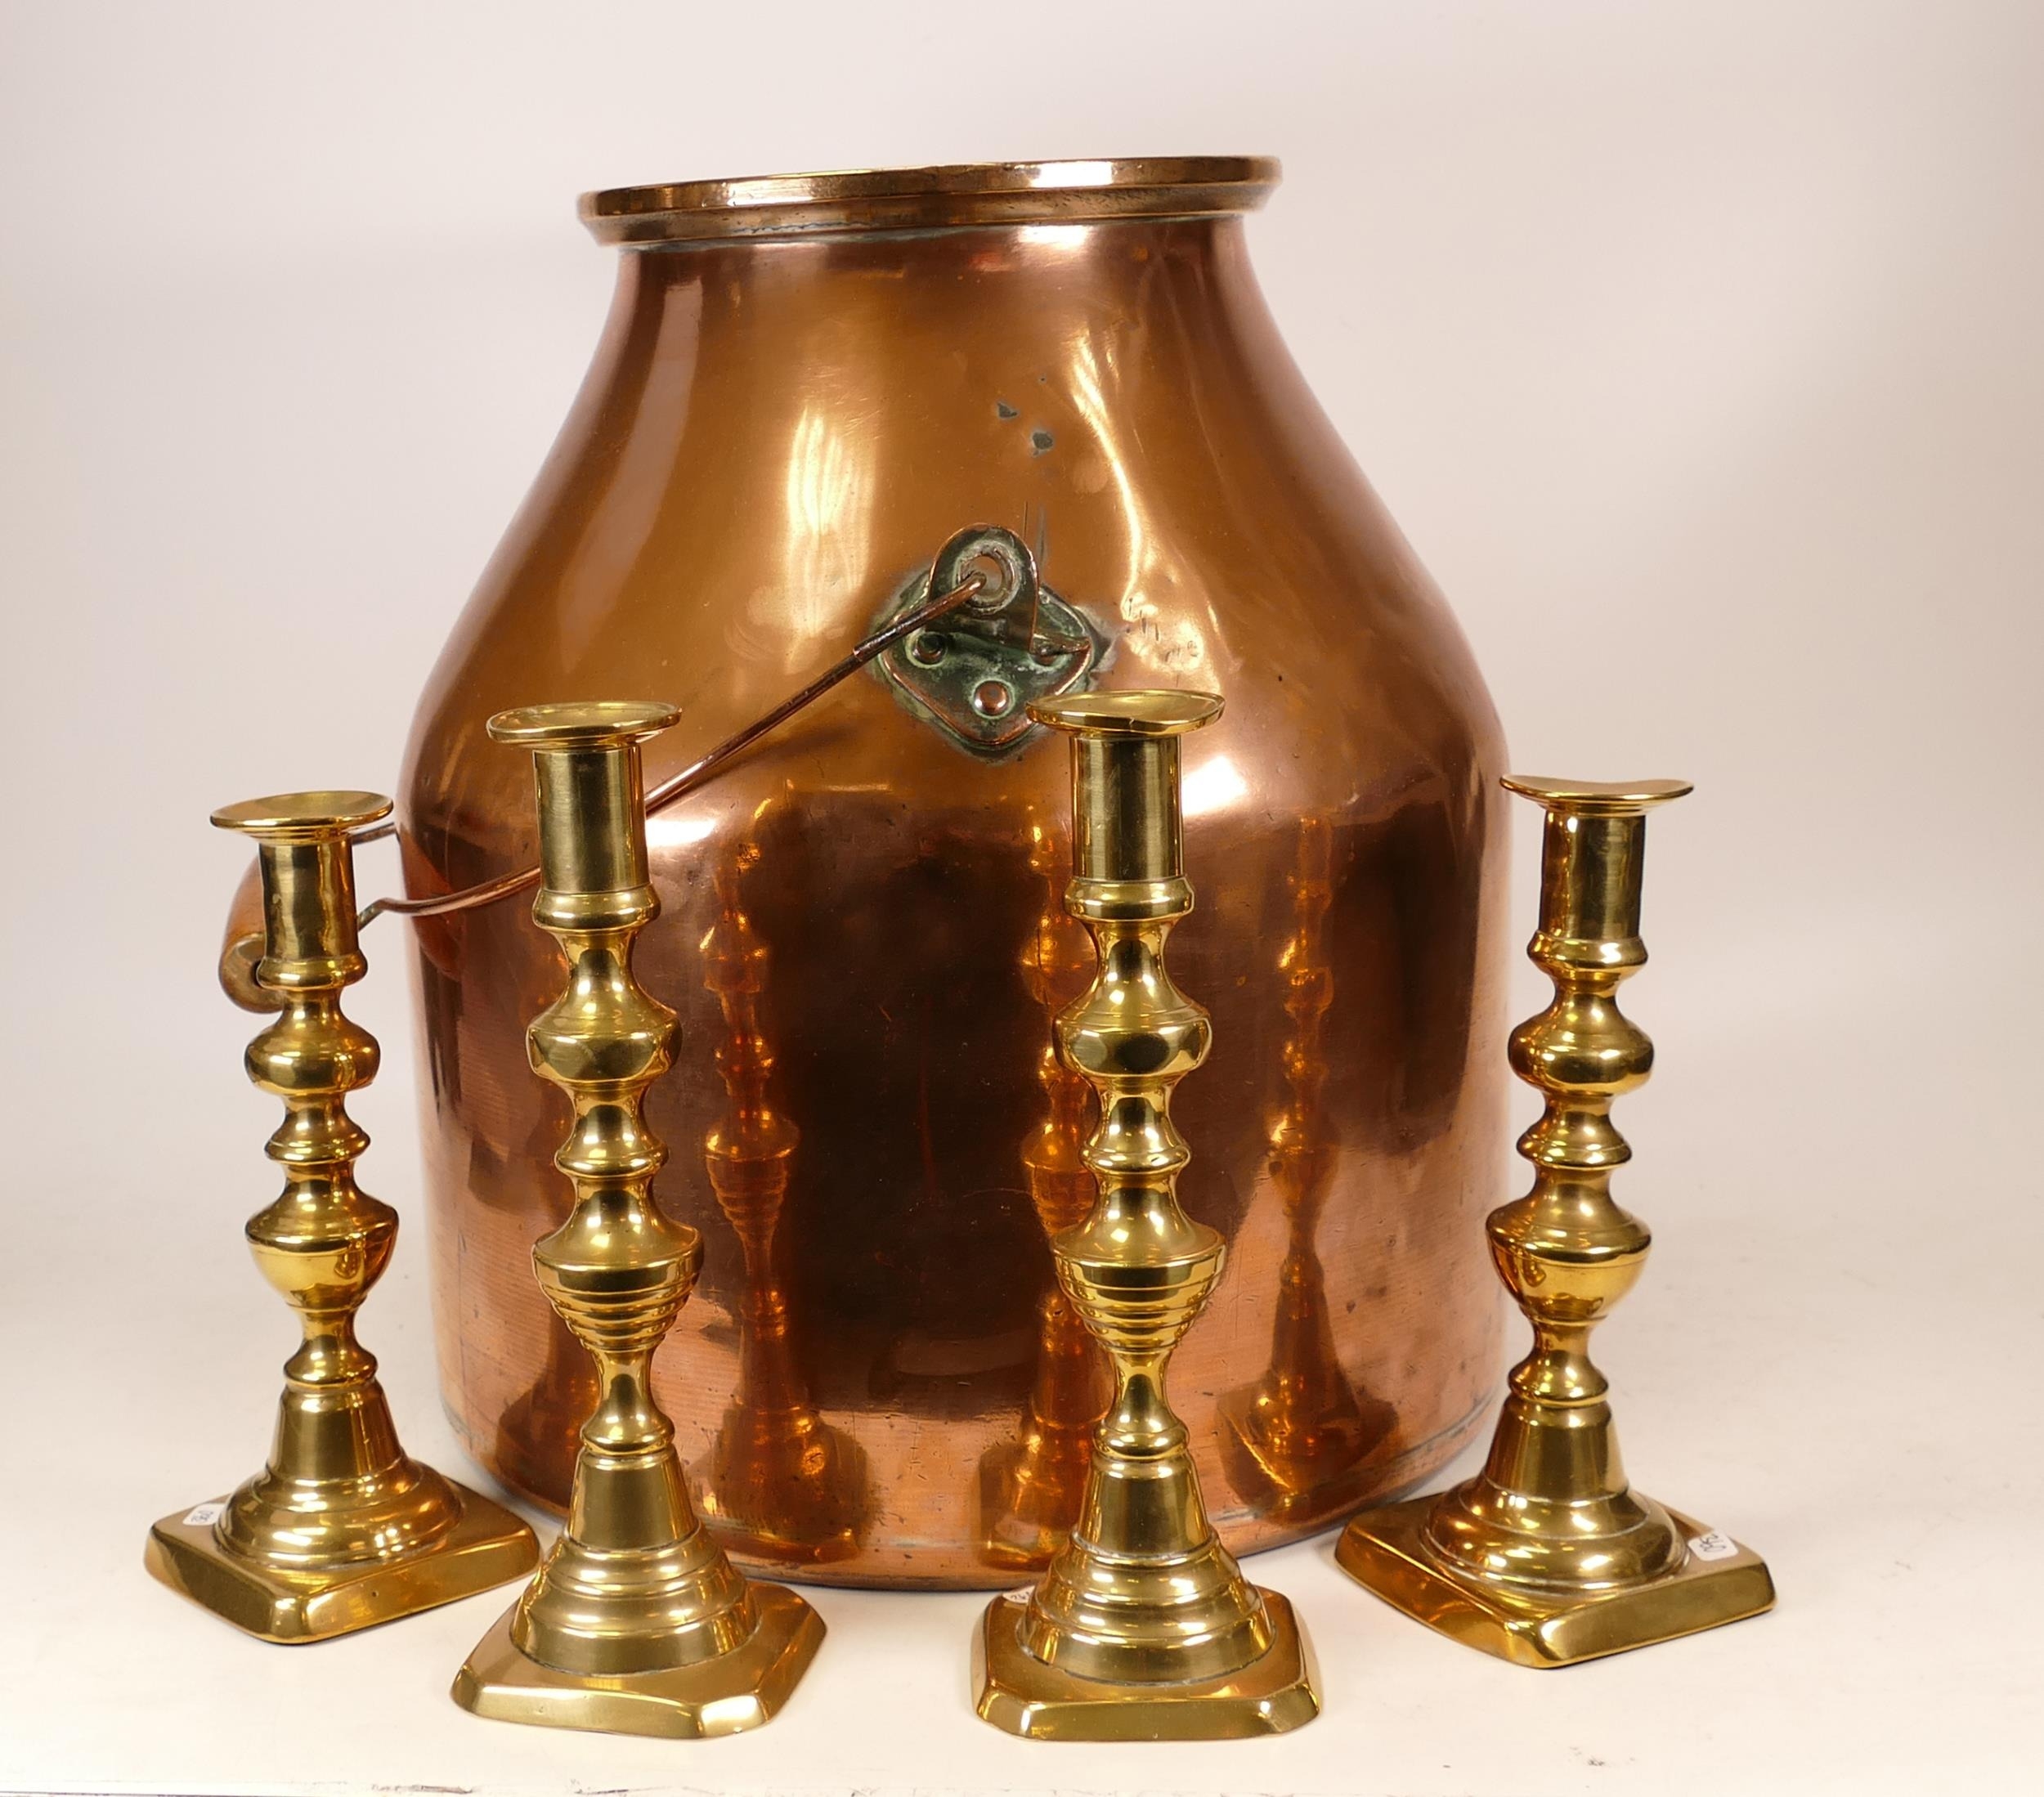 Copper milk churn together with 4 brass candlestick holders (5)